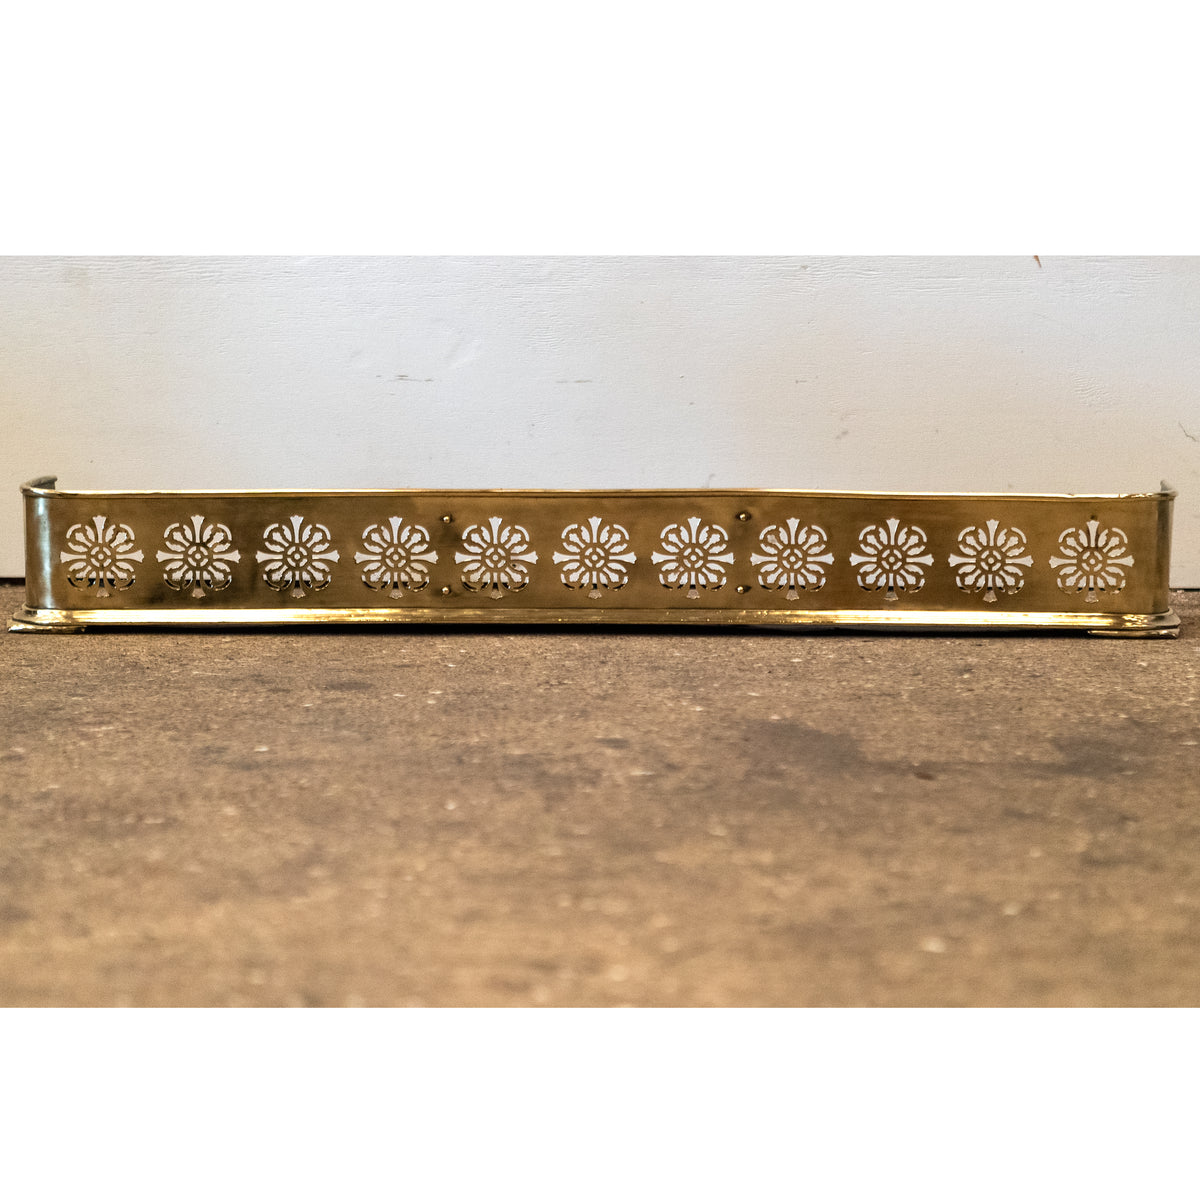 Antique Brass Fireplace Fender | The Architectural Forum